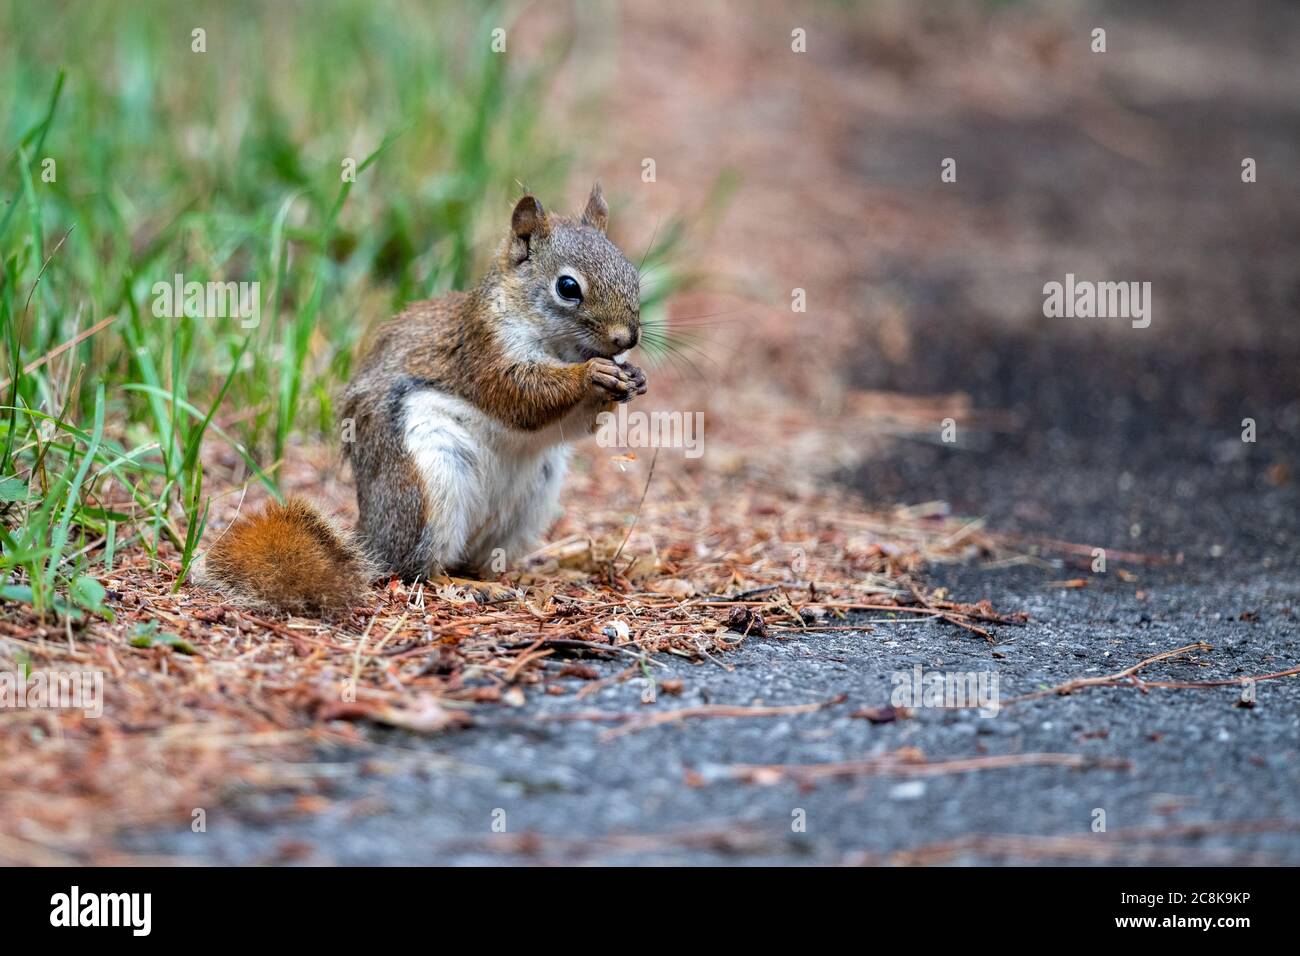 A red tailed squirrel is sitting down while enjoying a something to eat Stock Photo